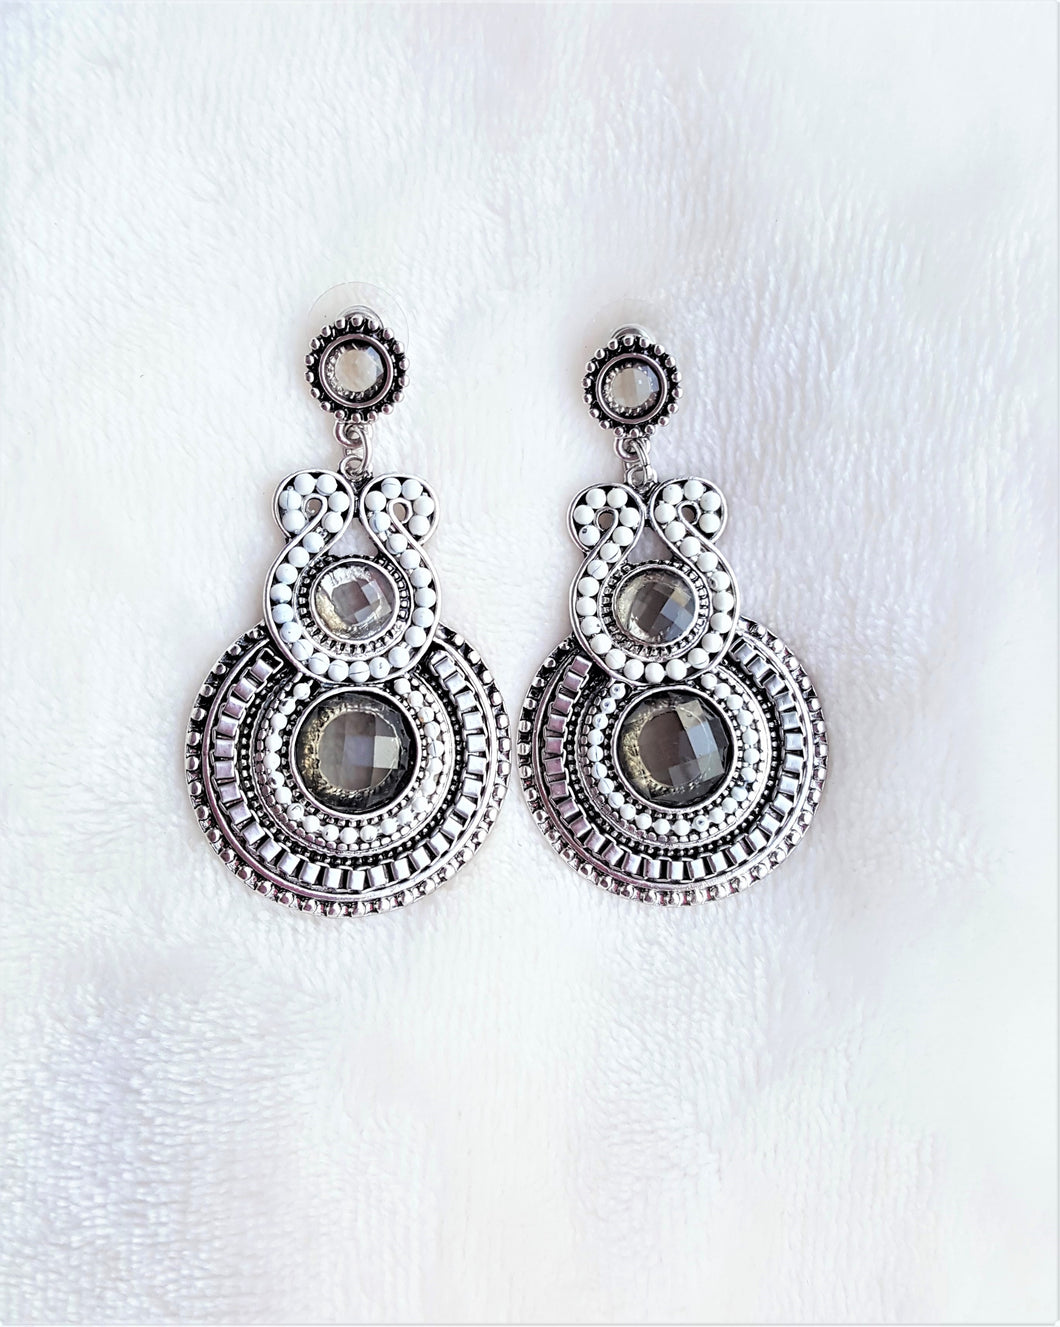 Earrings Vintage Ethnic Party wear Antique Silver Dangle Drop Earring, Boho Jewelry by UrbanFlair - Urban Flair USA